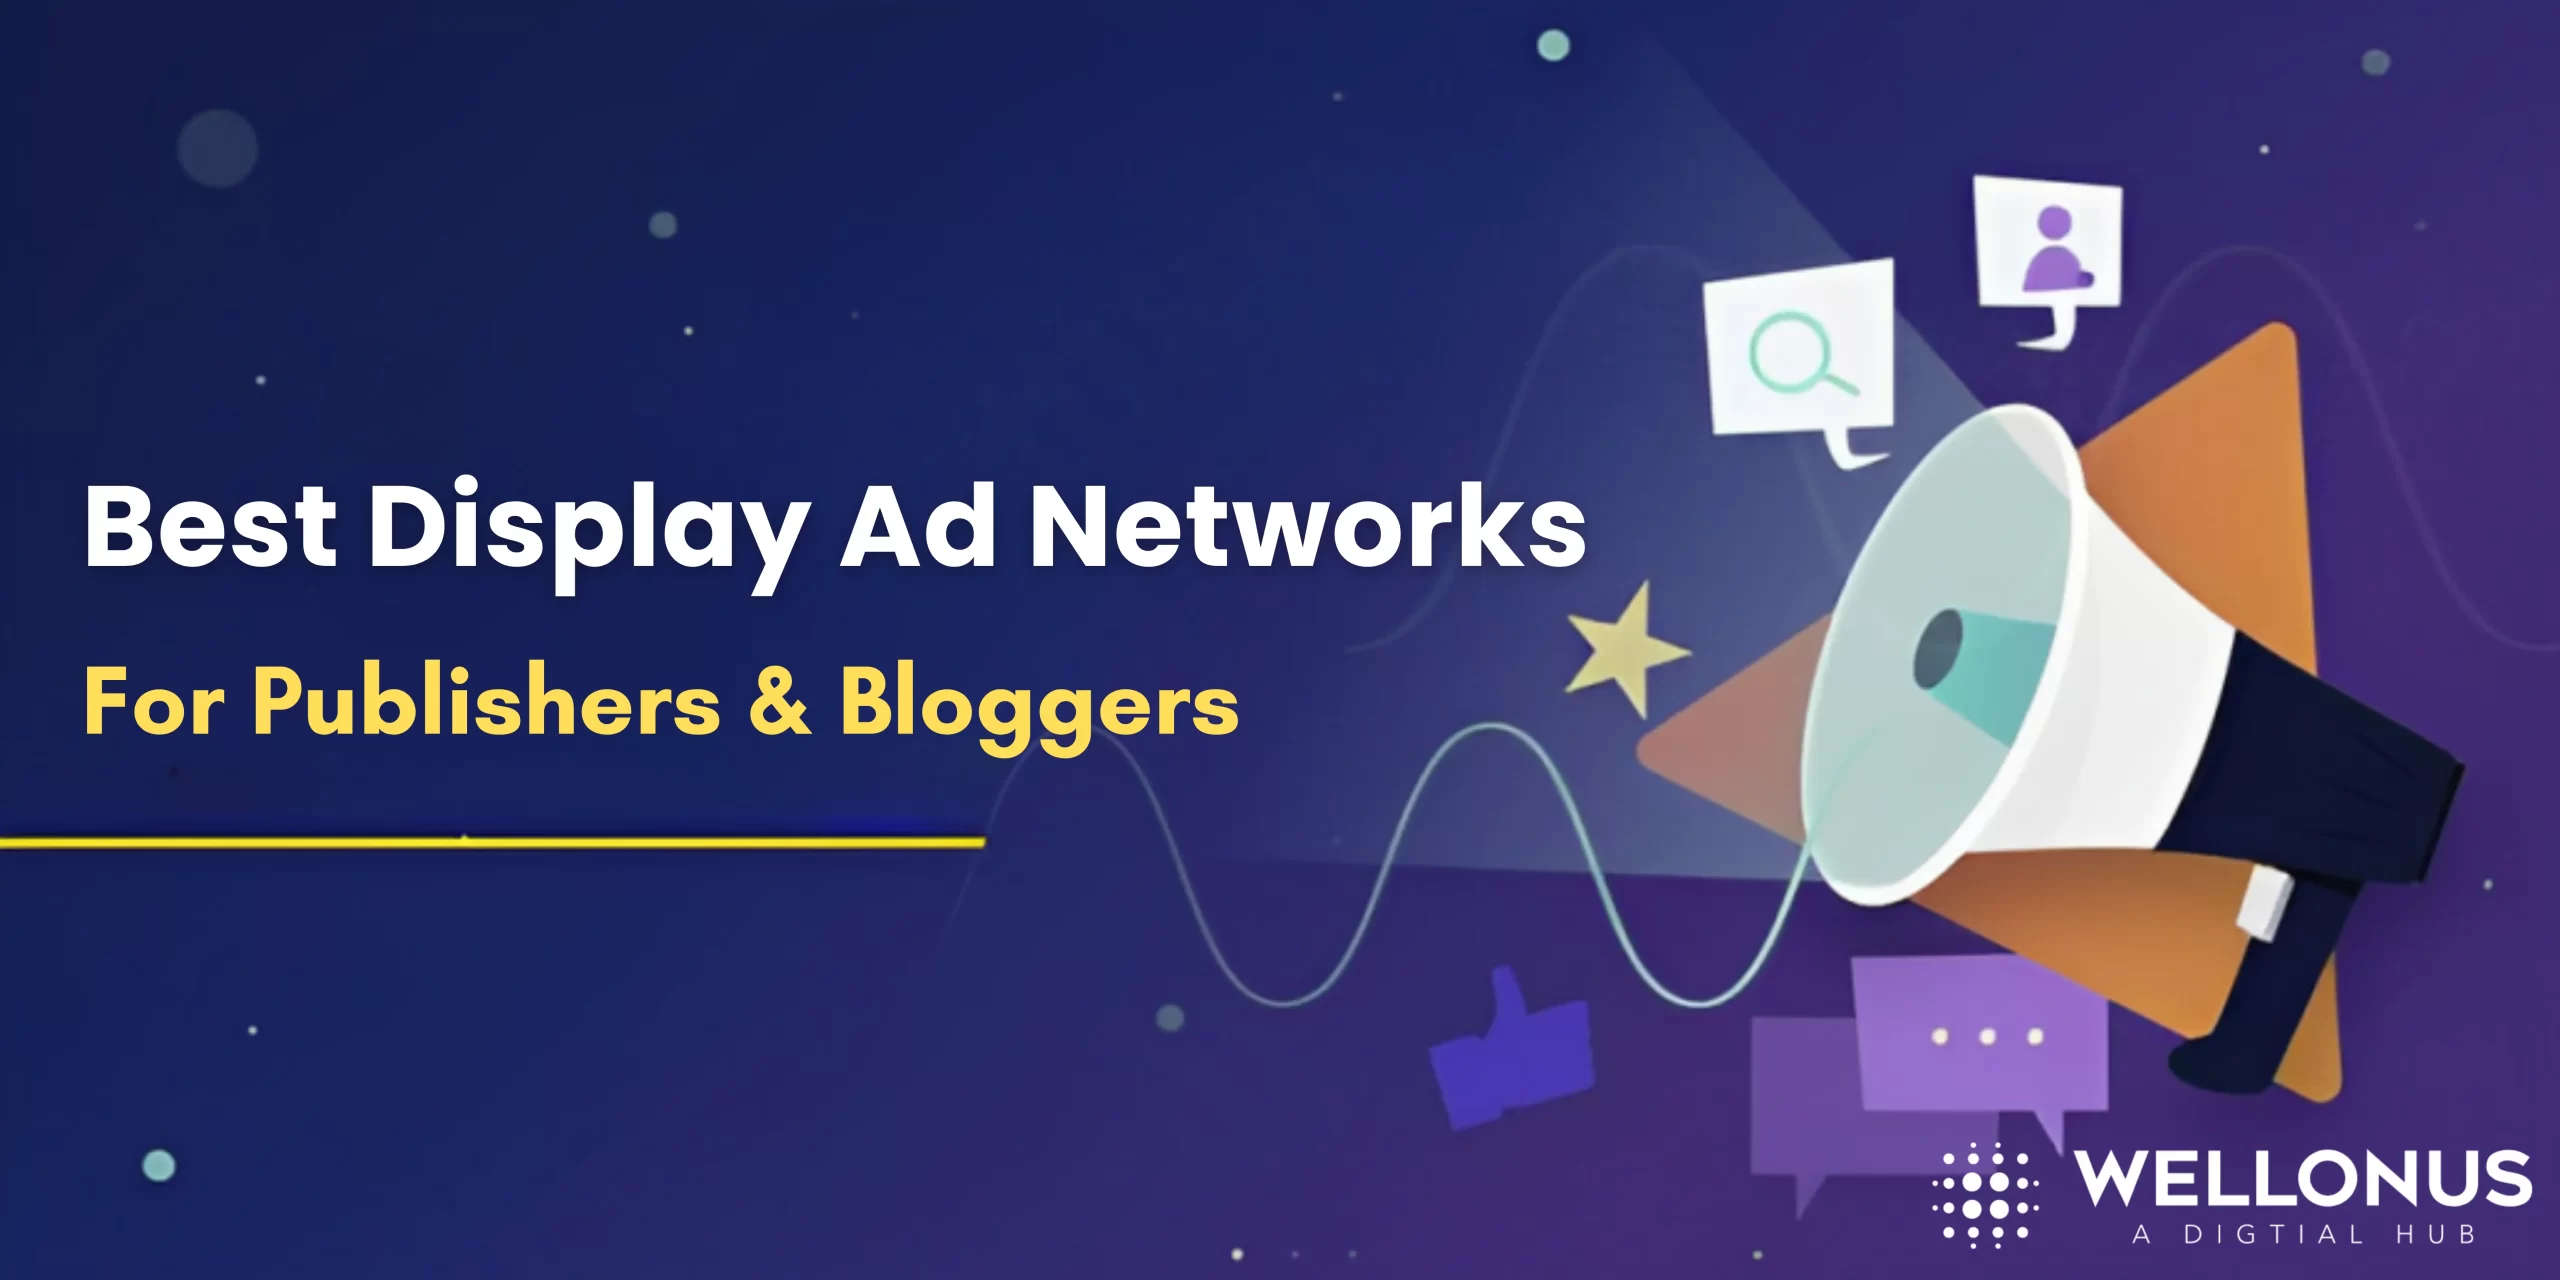 Best Display Ad Networks For Publishers & Bloggers